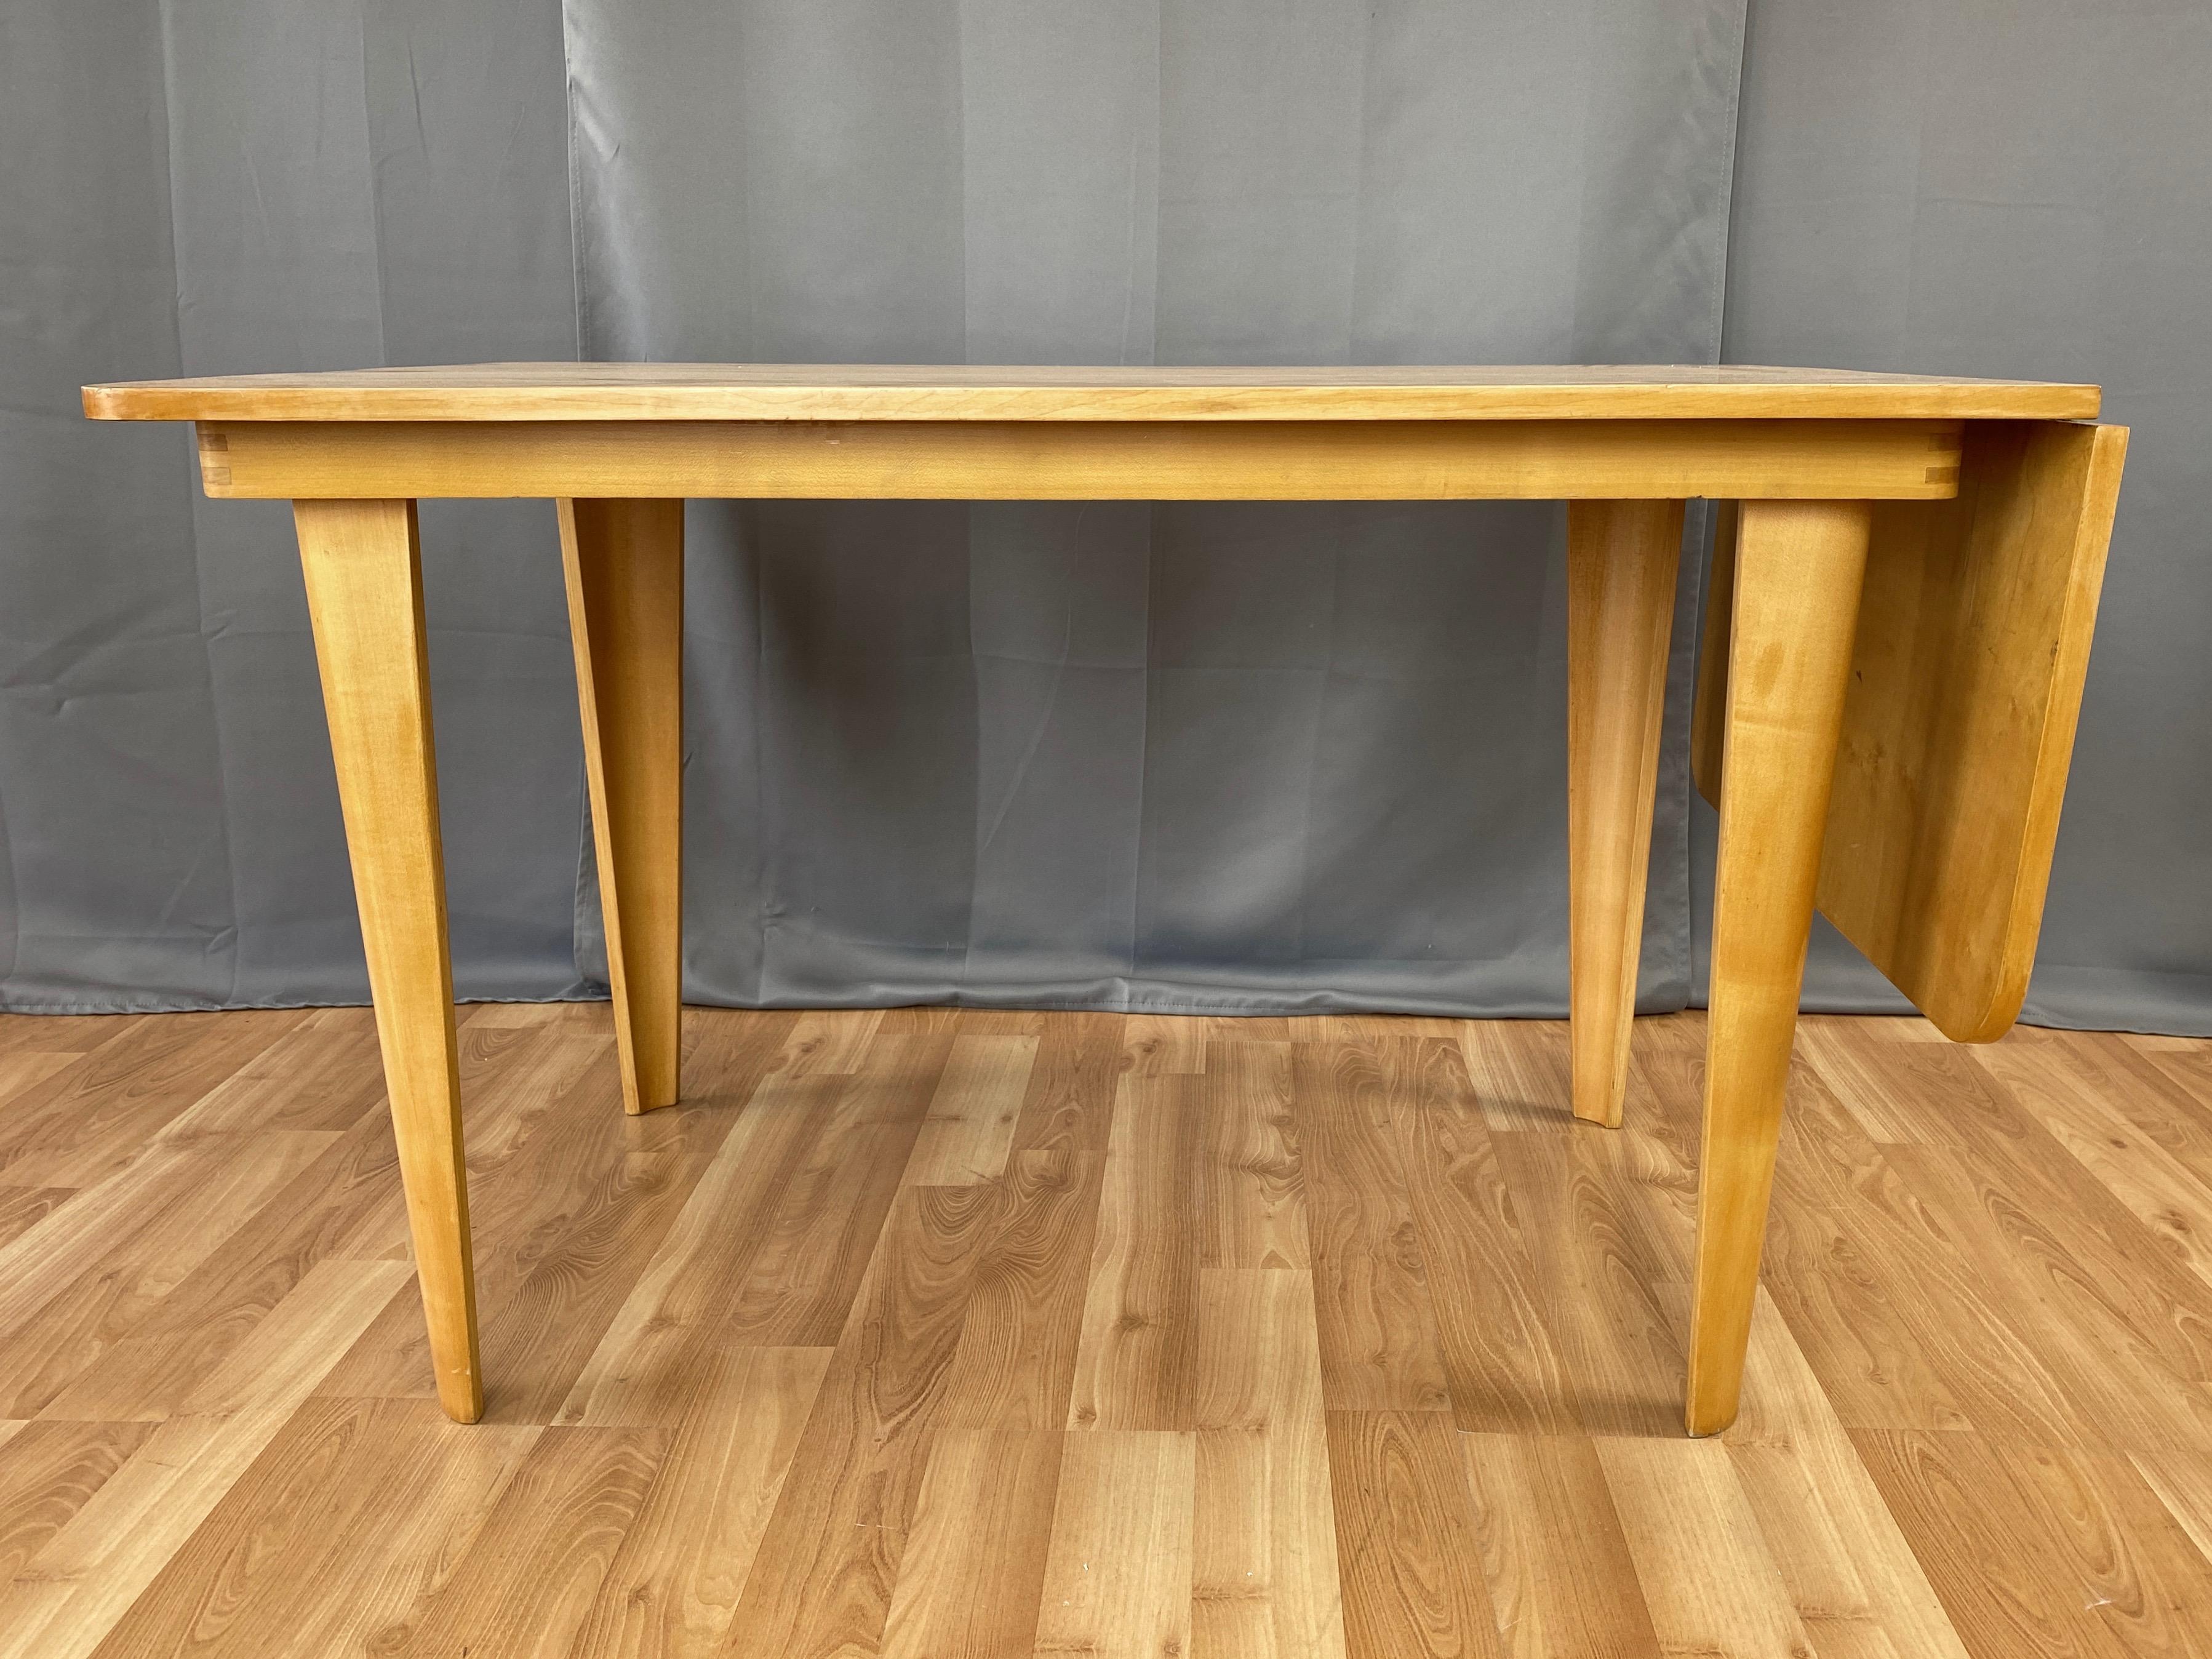 A circa 1949 birchwood drop-leaf dining table by important Dutch designer Cornelius Louis “Cor” Alons for Gouda den Boer.

Clean mid-century modern lines distinguished by skillfully executed and generously sized concave bentwood tapered legs.